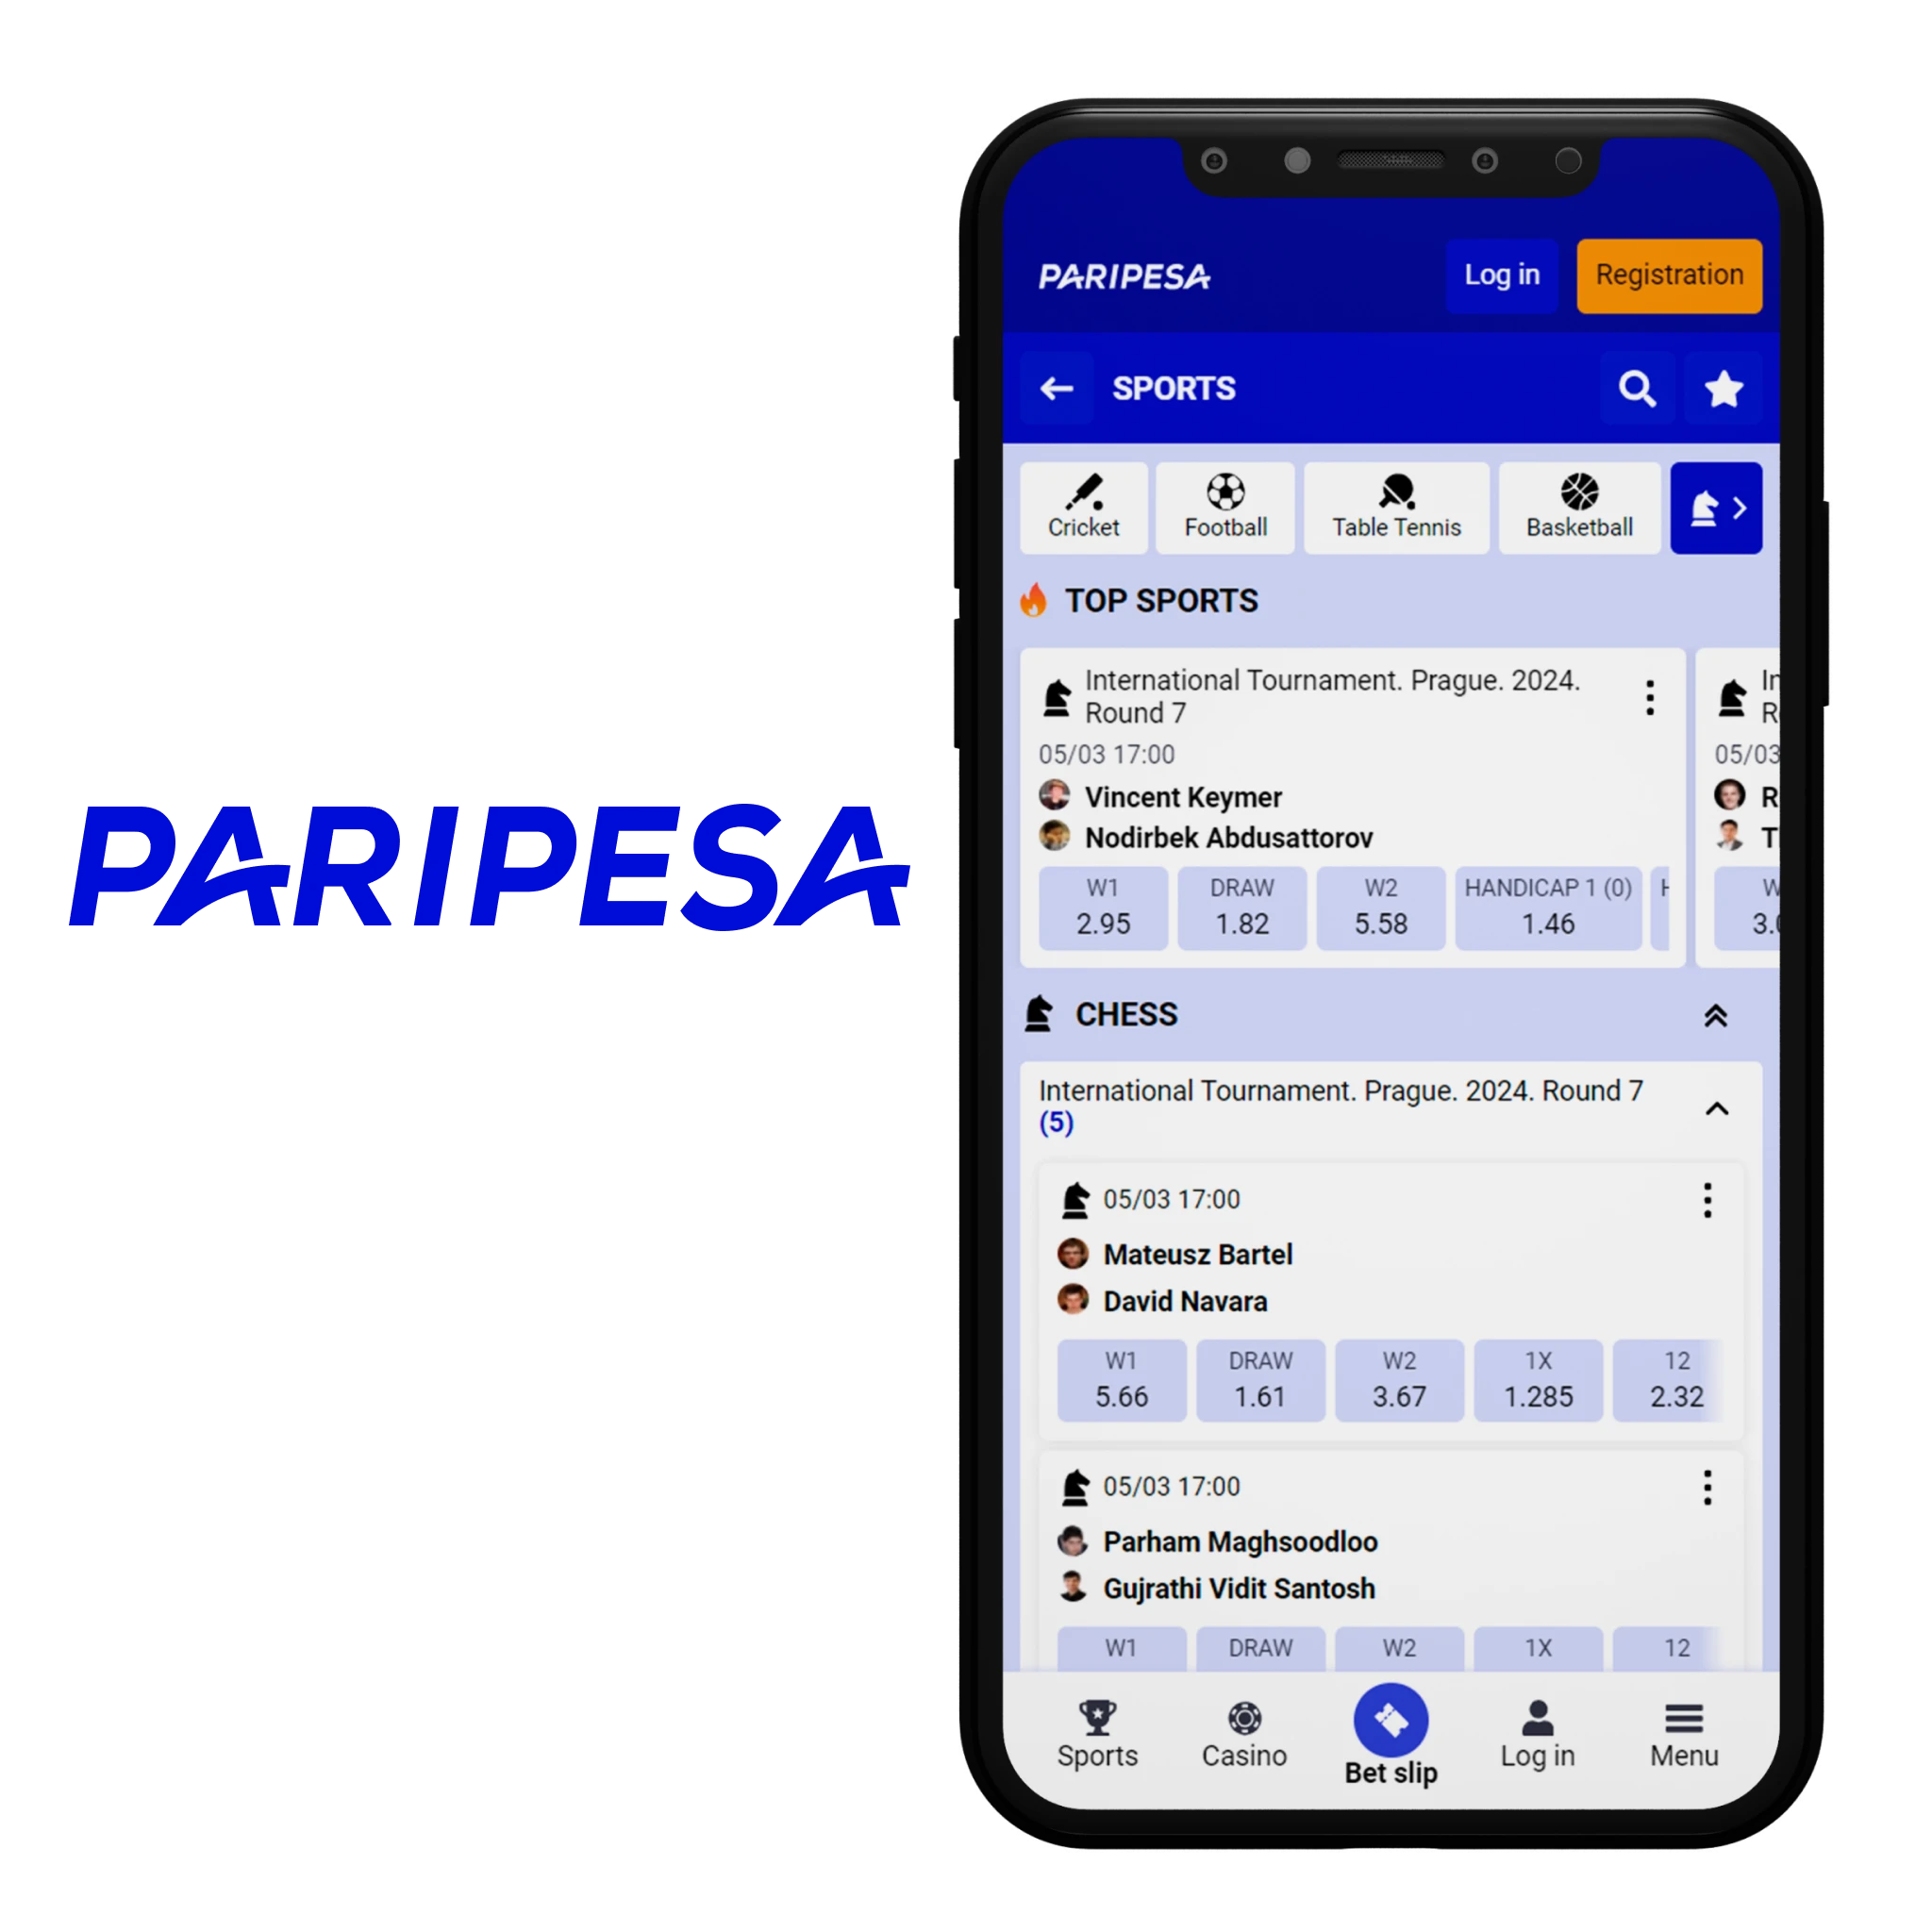 Paripesa app offers a vibrant and engaging platform for chess admirers.